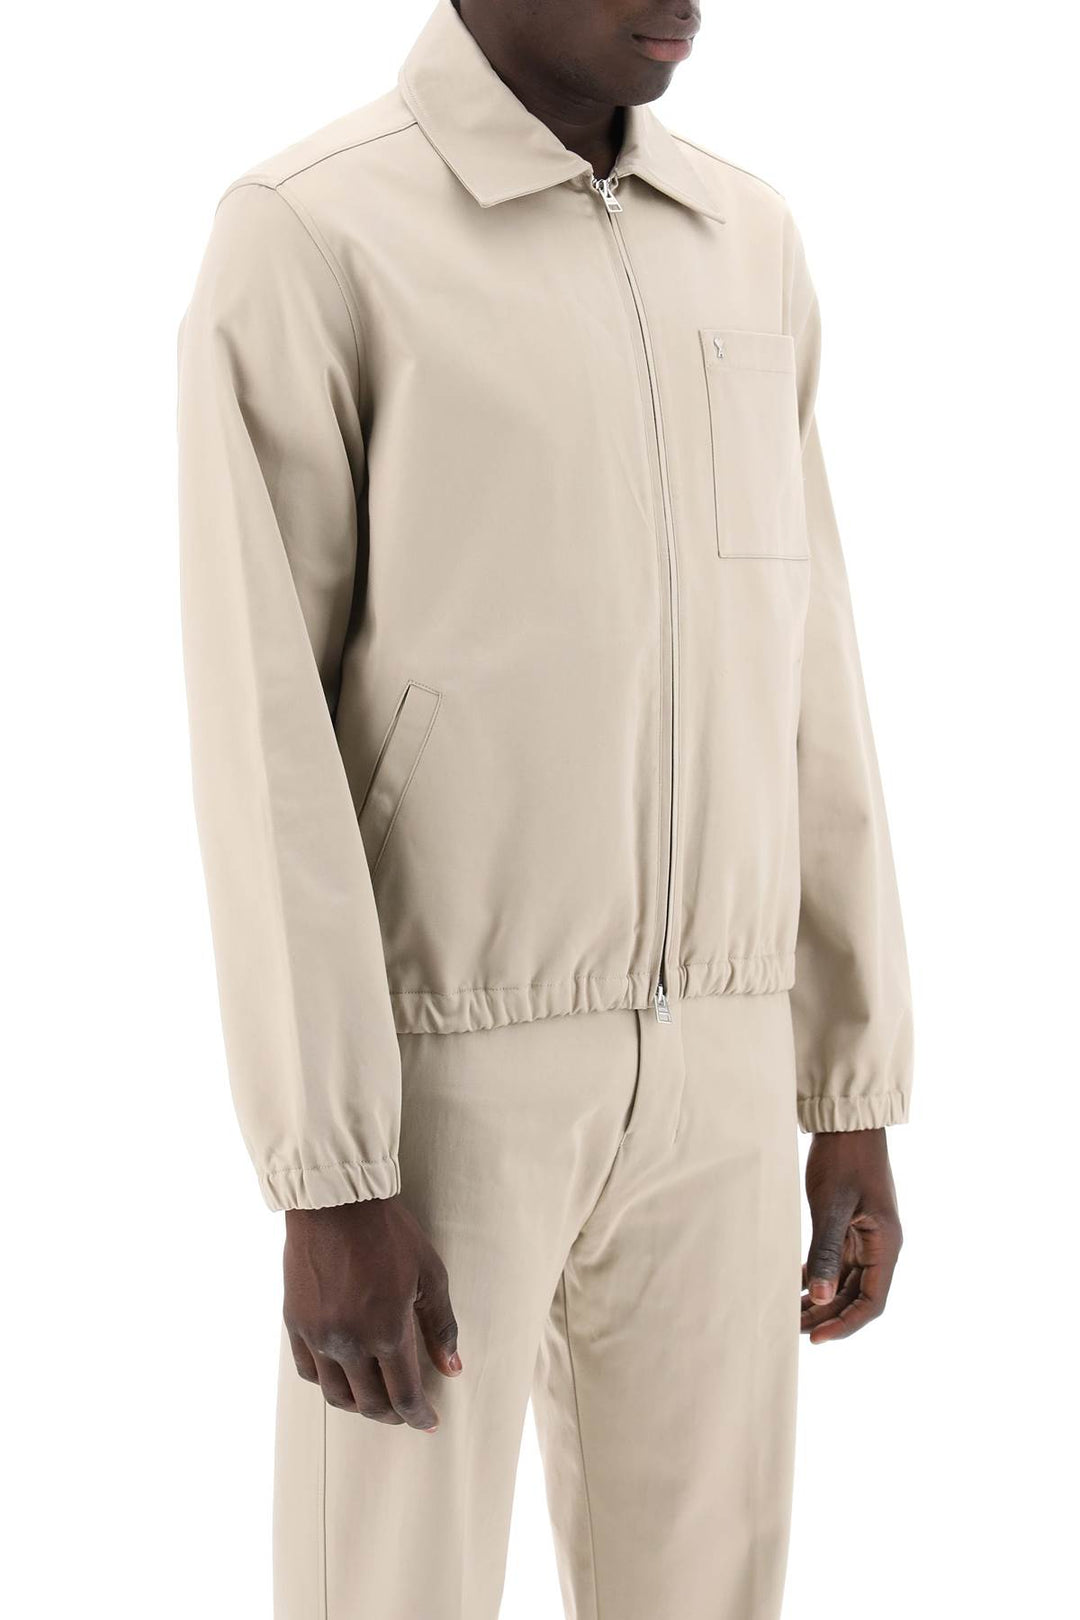 Ami Alexandre Matiussi Replace With Double Quoteami De Coeur Cotton Jacket   Beige